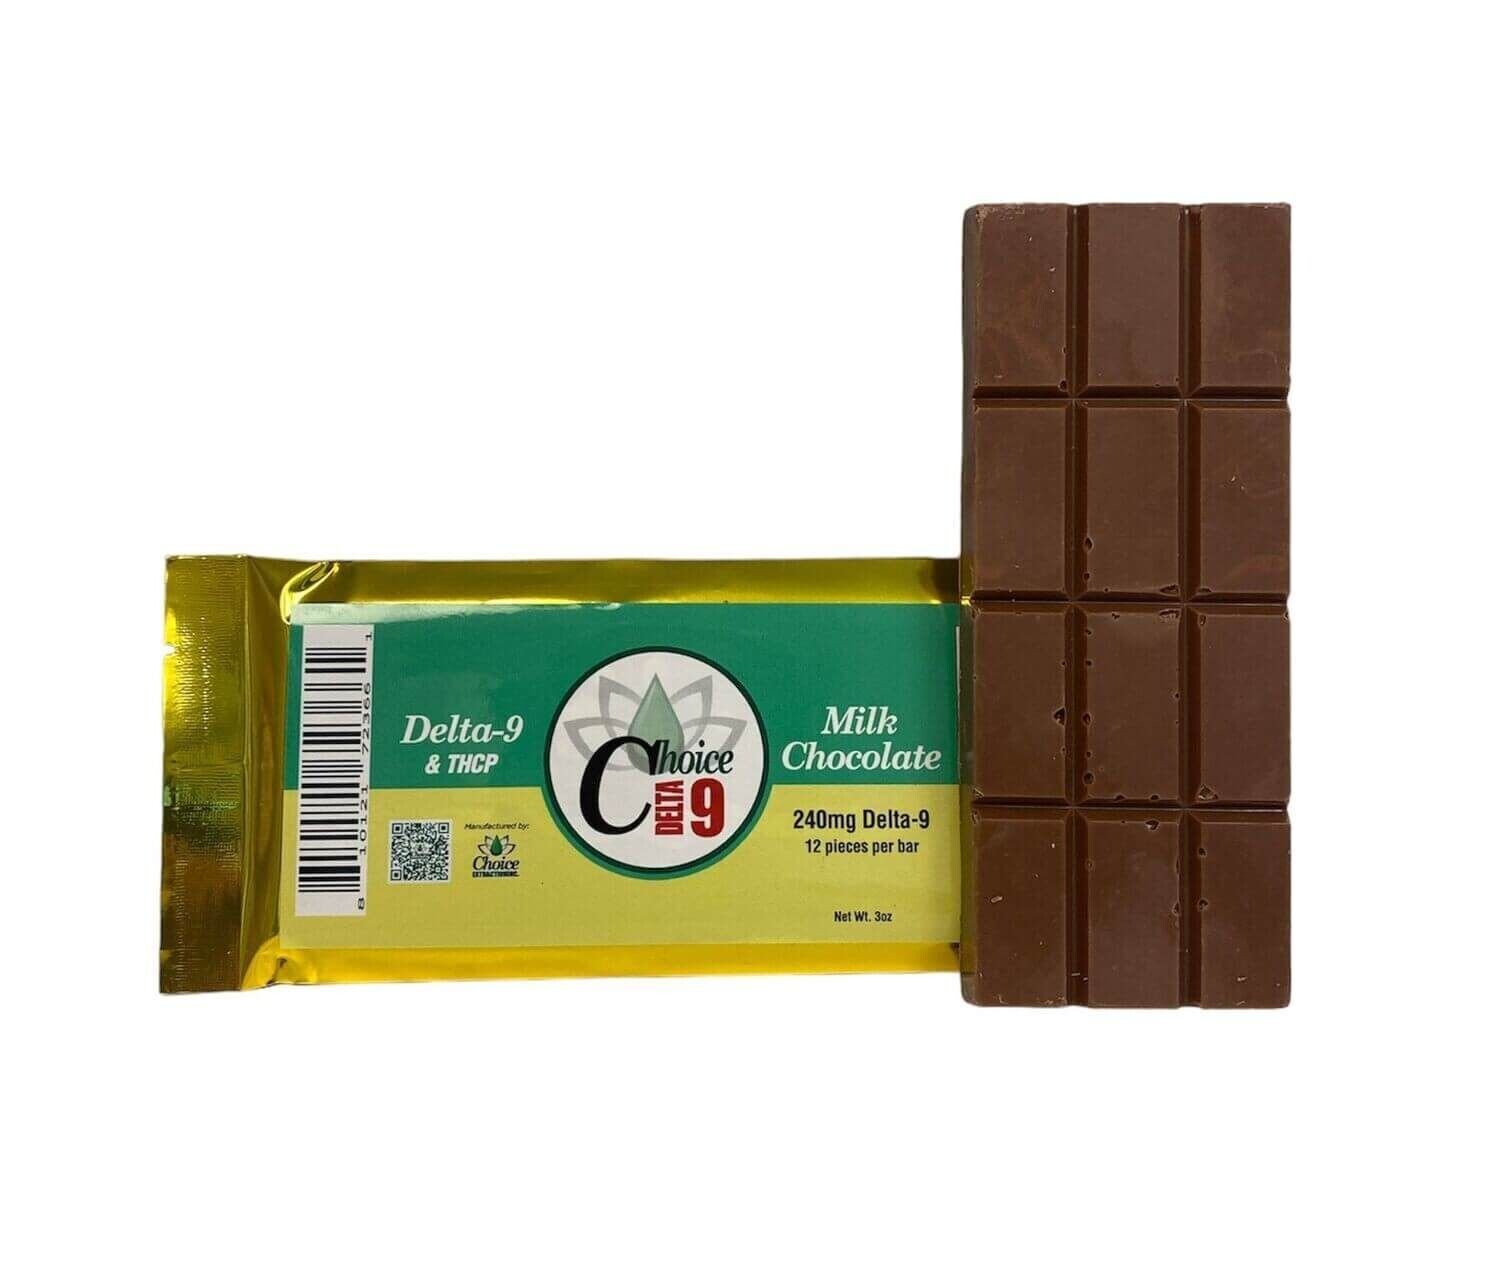 Delta-9 + THCP Chocolate Bar - 240mg TOTAL, 20mg Per Piece